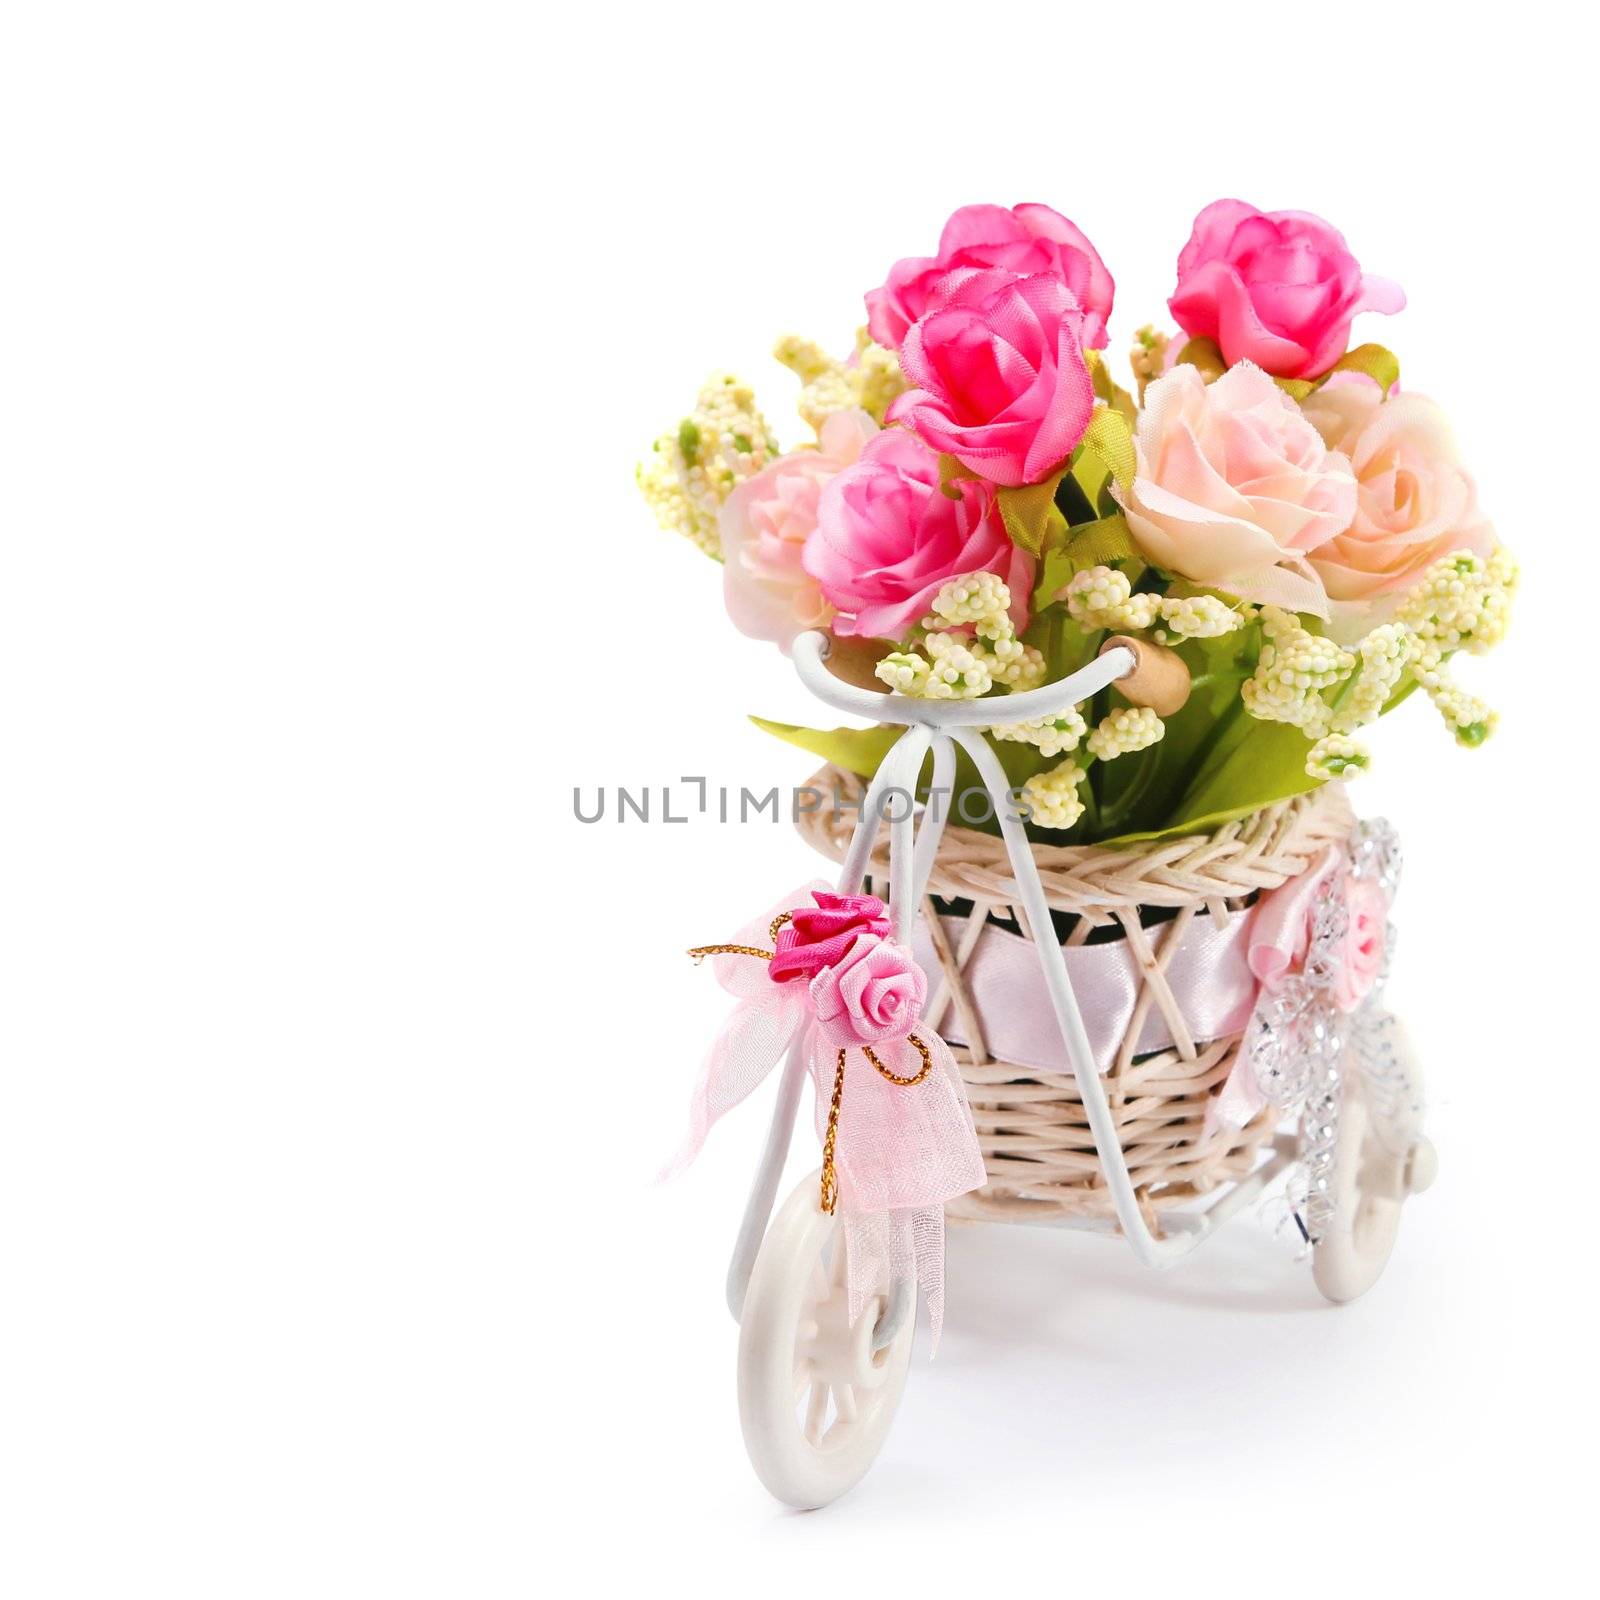 Flowers on white background by Myimagine